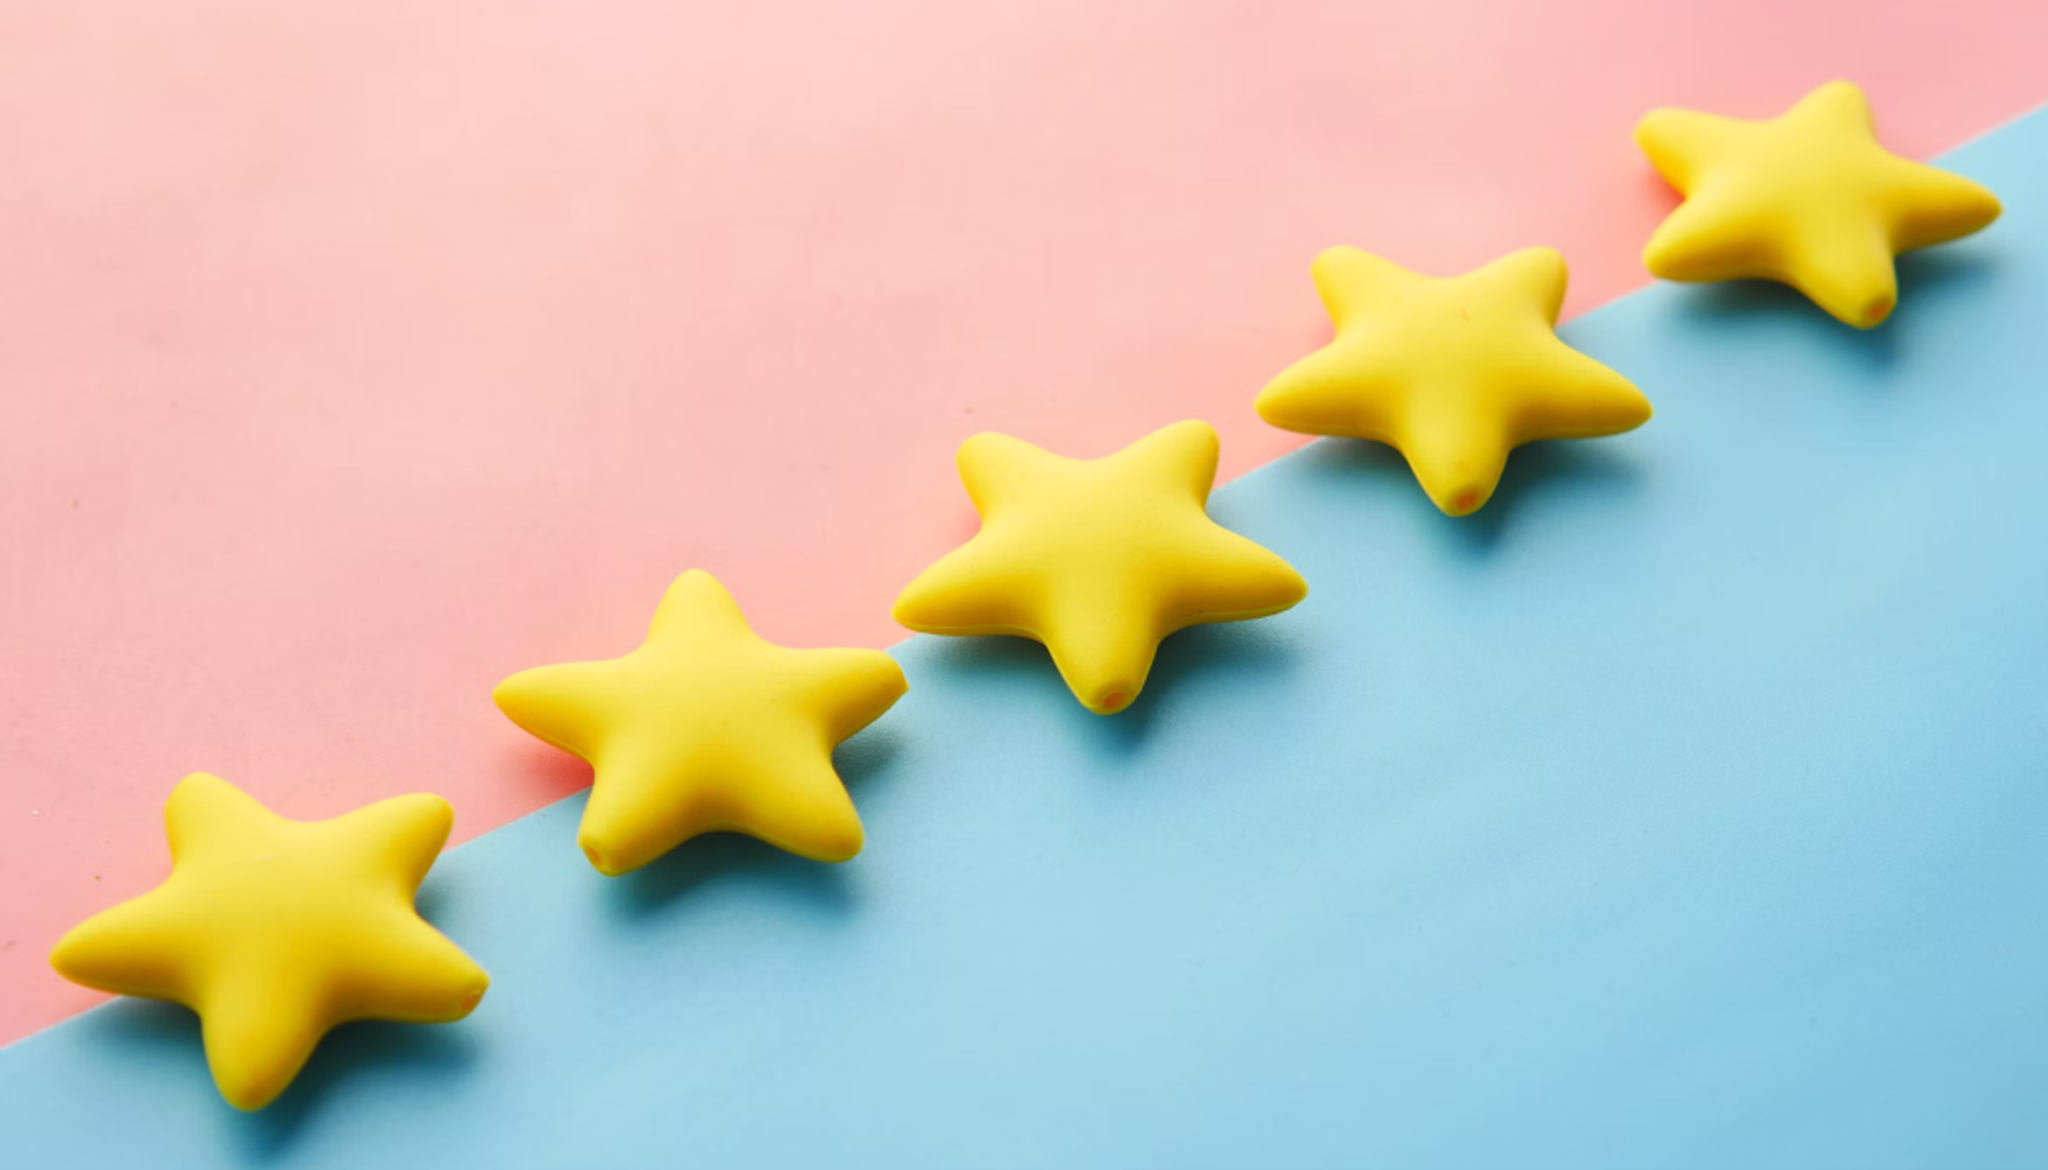 This image presents a split colour background of pink and blue with vibrant yellow stars over the top 